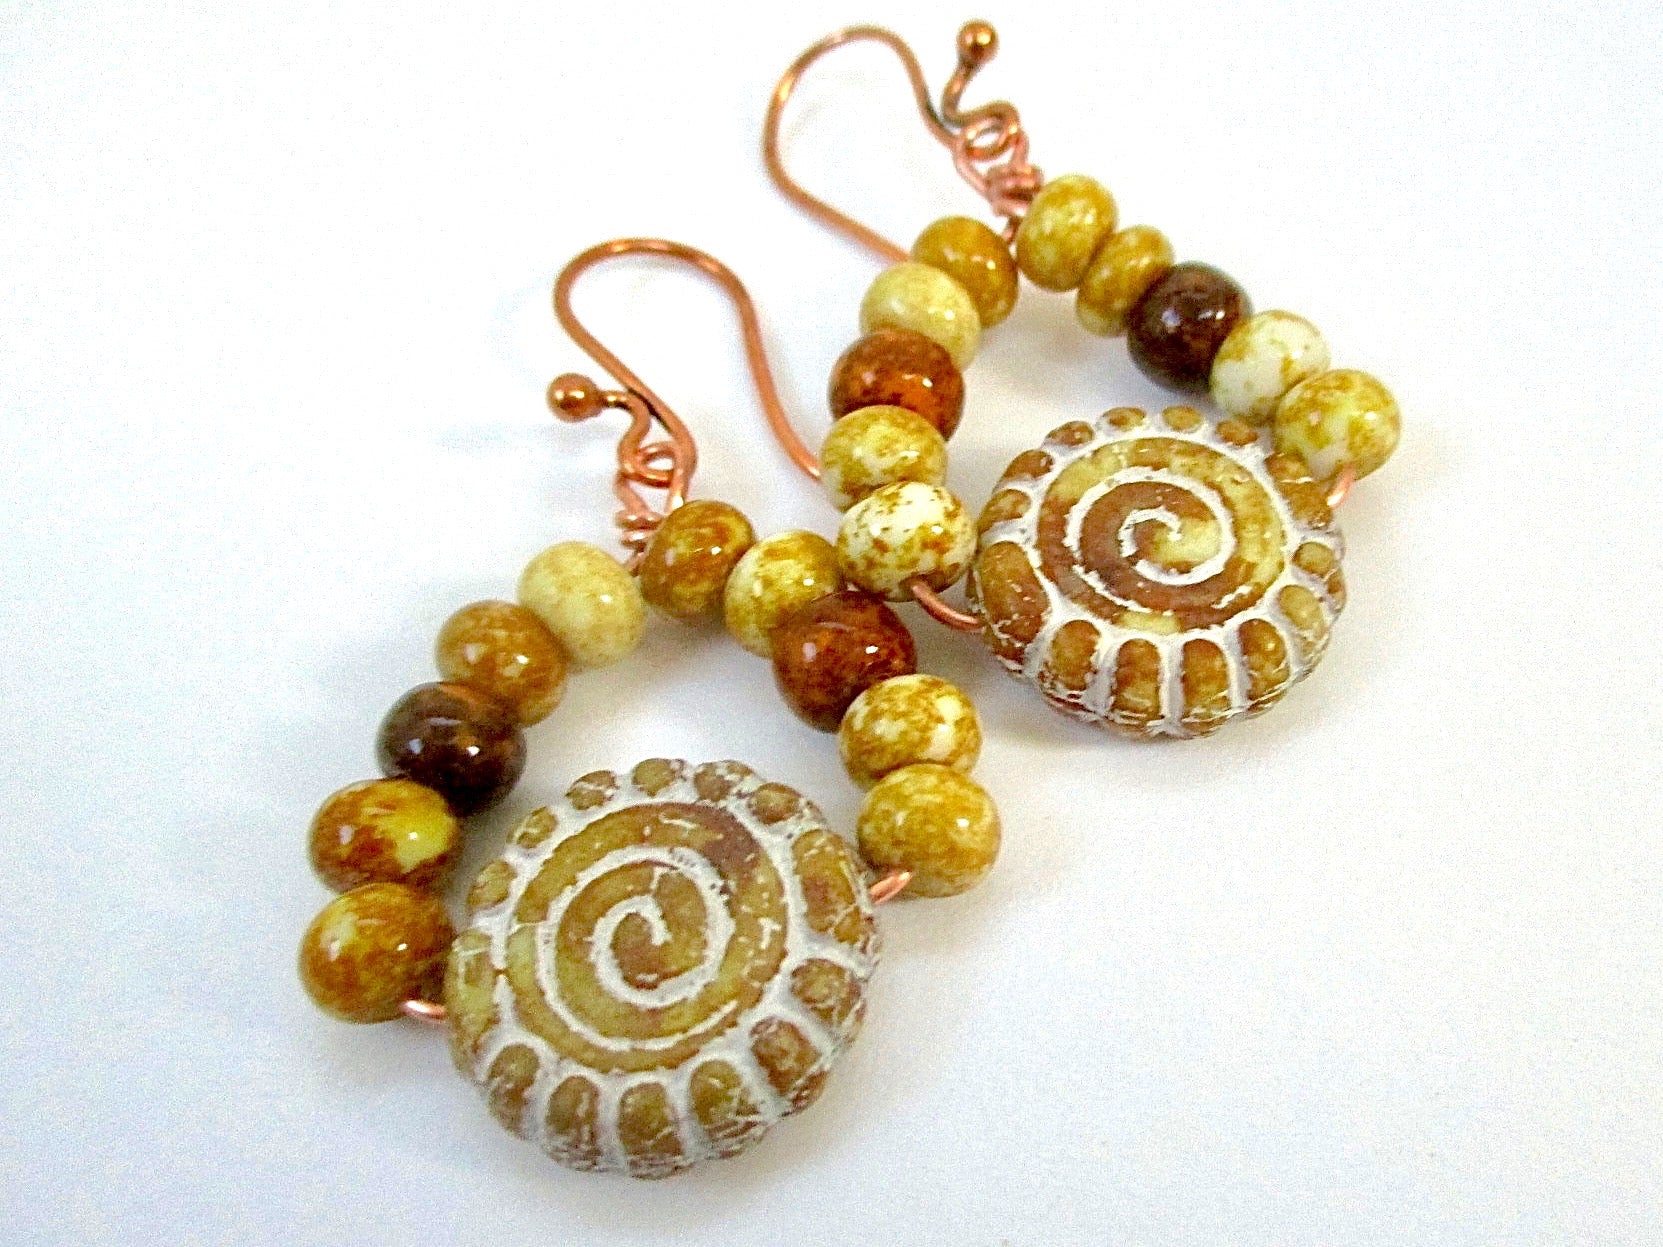 Circle of Life Rustic Boho Earrings with Czech Glass Dangles and Copper Wires